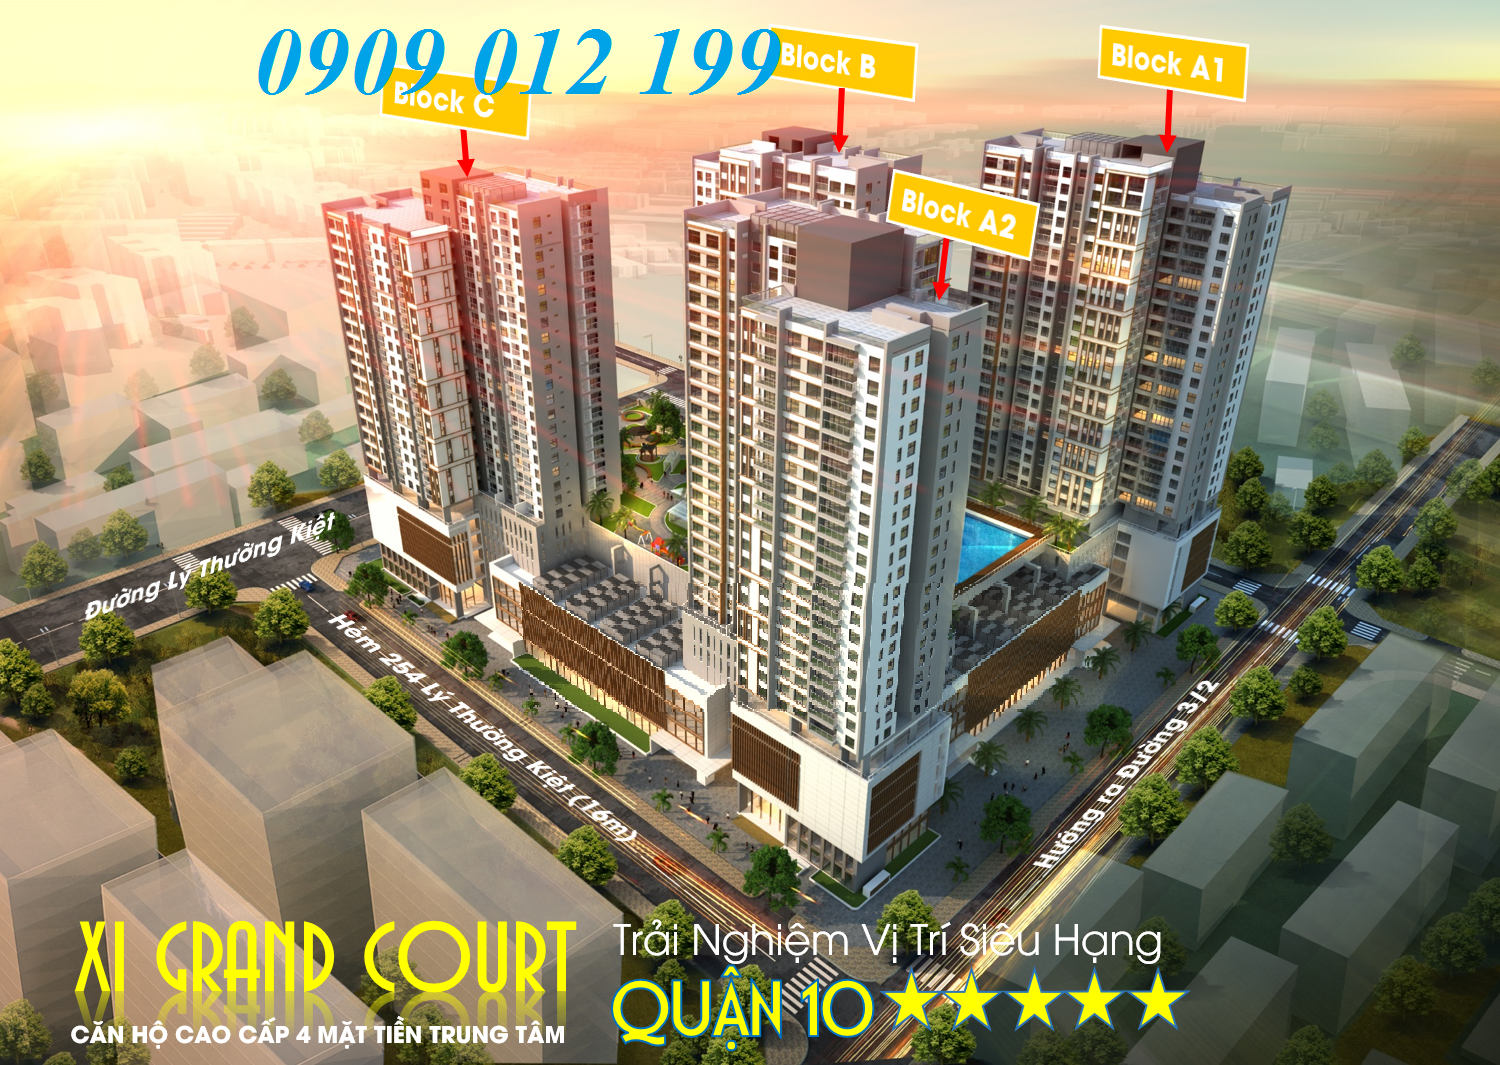 https://cdn.realtorvietnam.com/uploads/real_estate/phoi-canh-tong-the-can-ho-xi-grand-court_1479436874.png